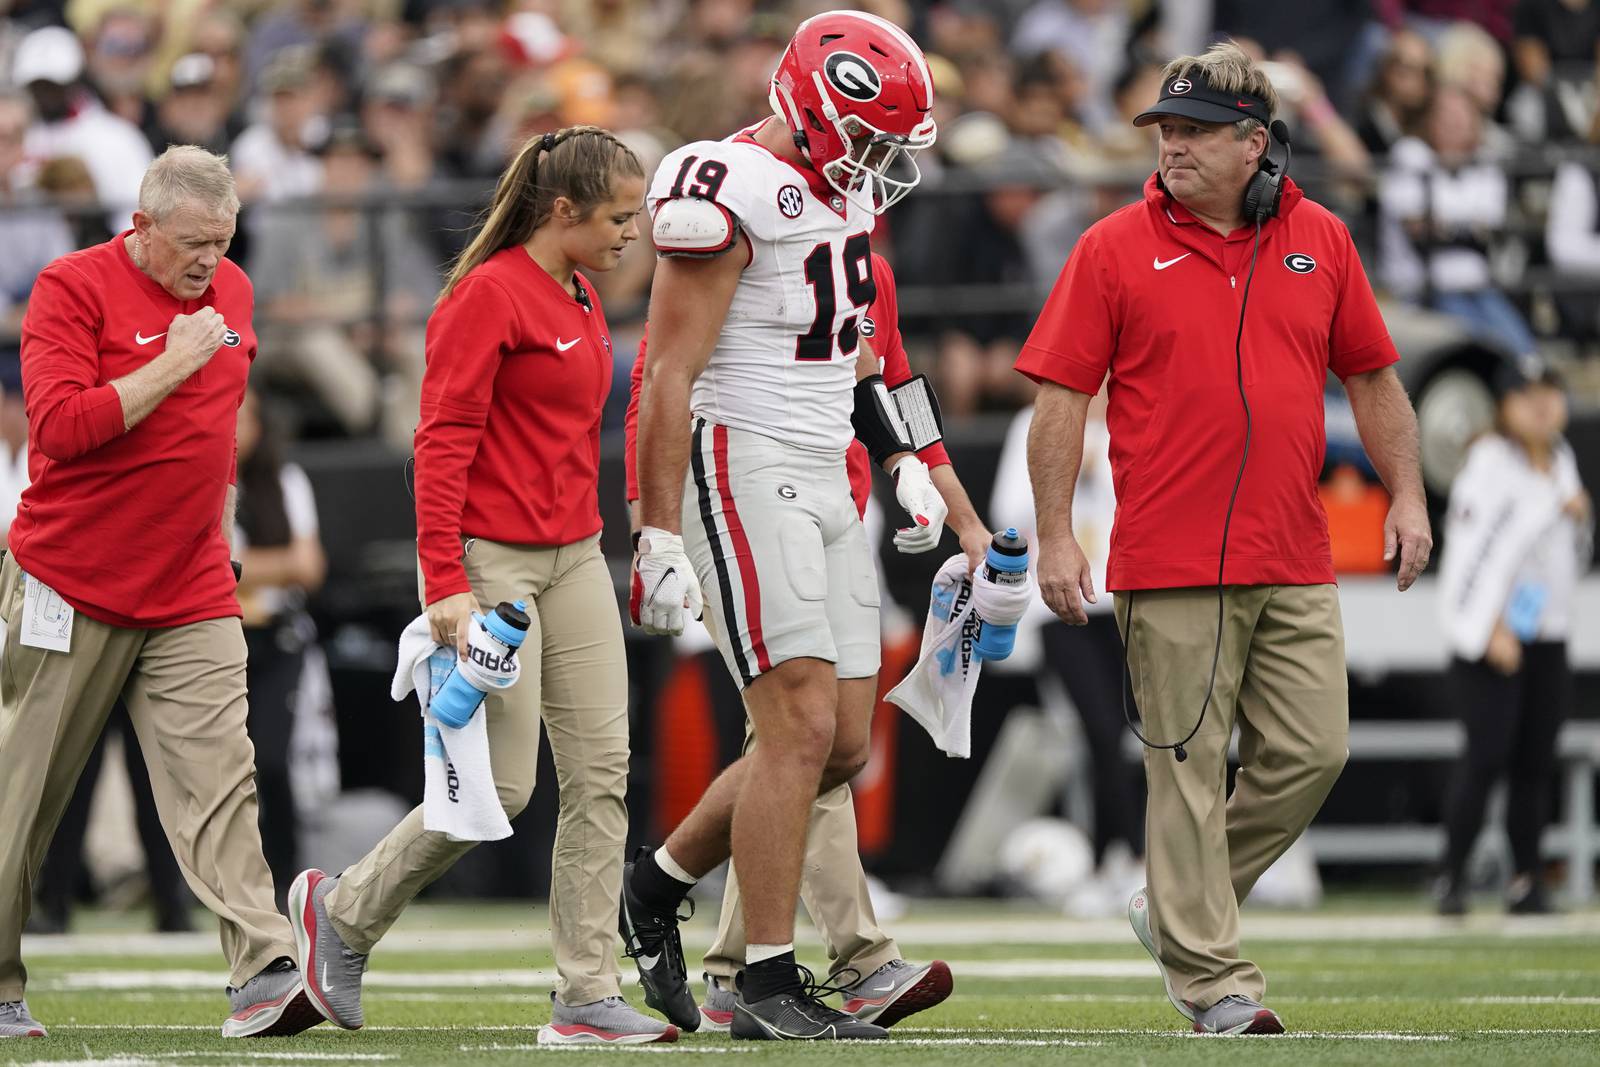 Tightrope surgery: What is the procedure that UGA star Brock Bowers had ...